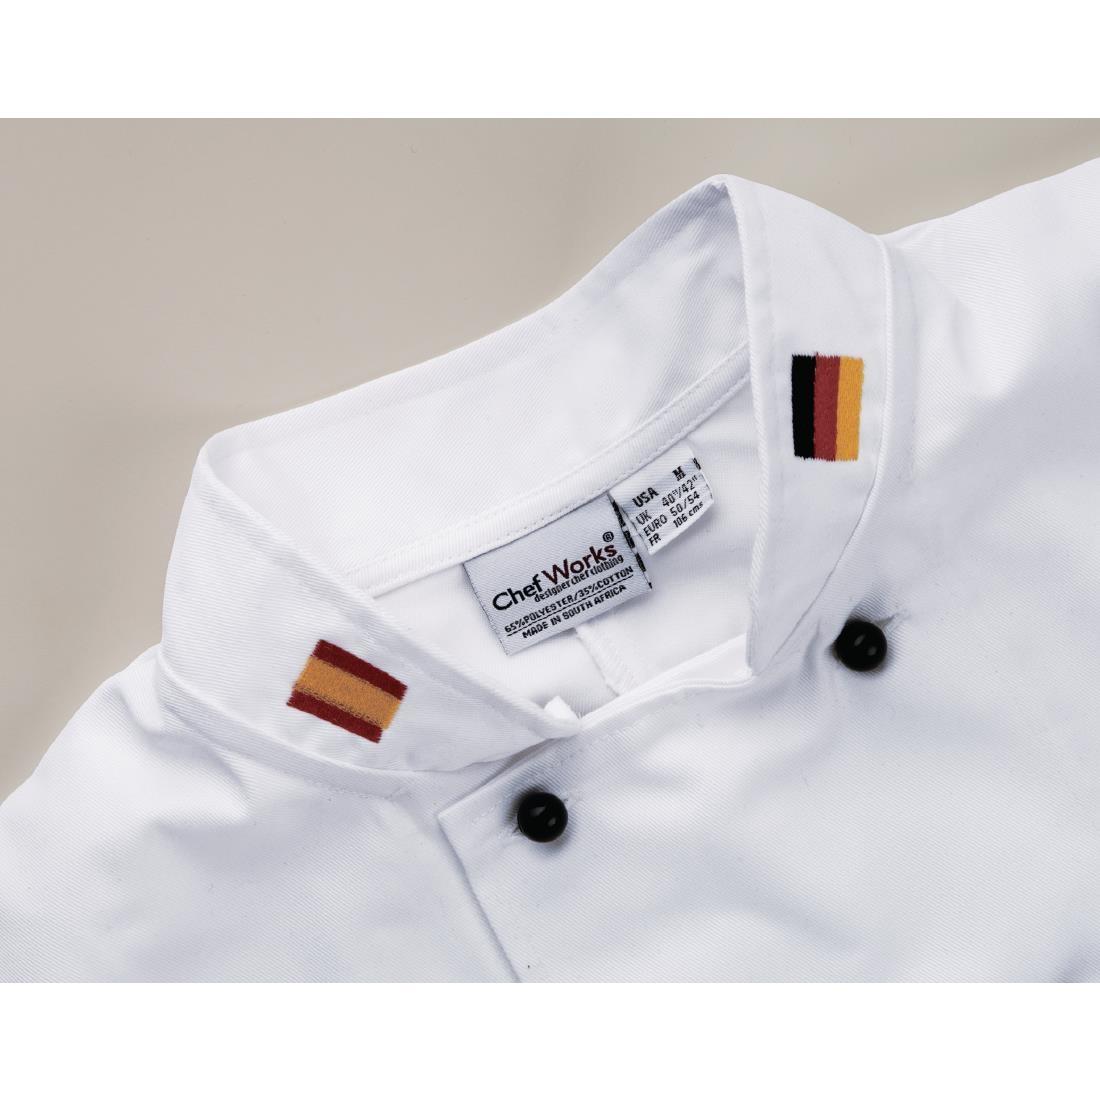 Embroidery Collar Flags - A987-IN  - 1